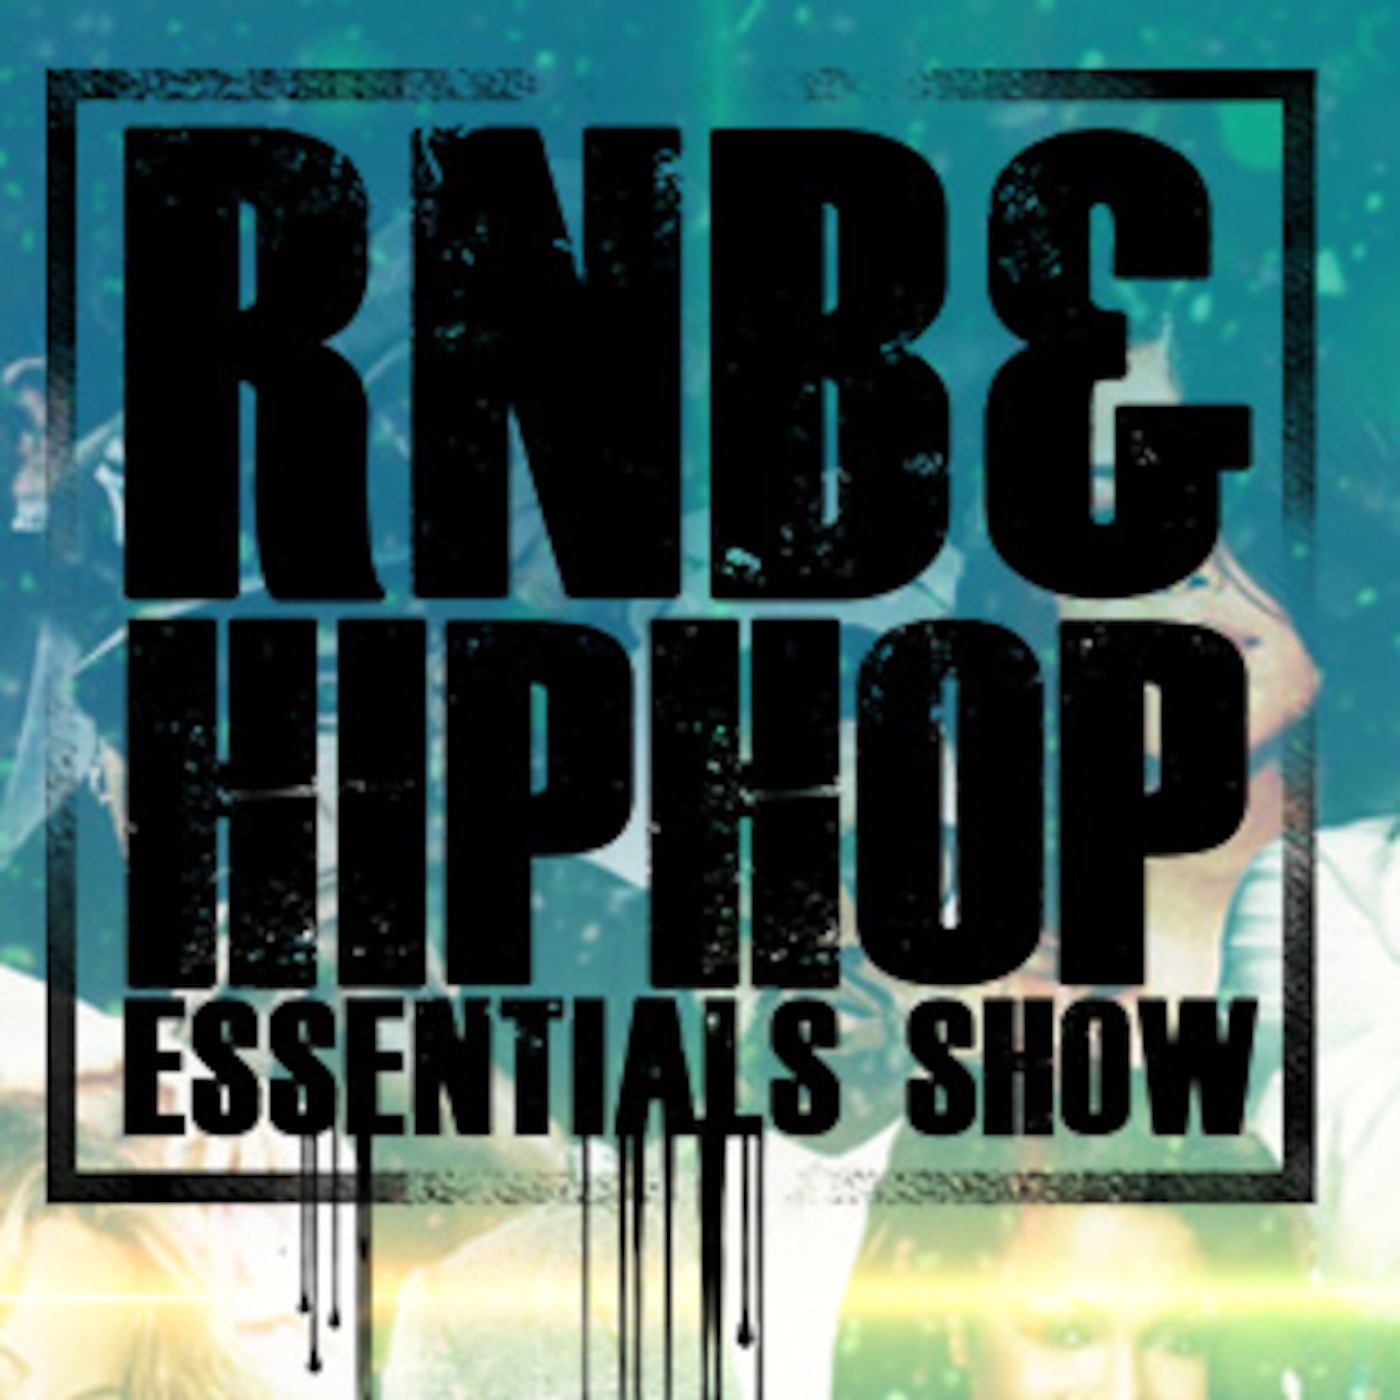 Best of January 2017 (1) - RnB and HipHop Essentials Show